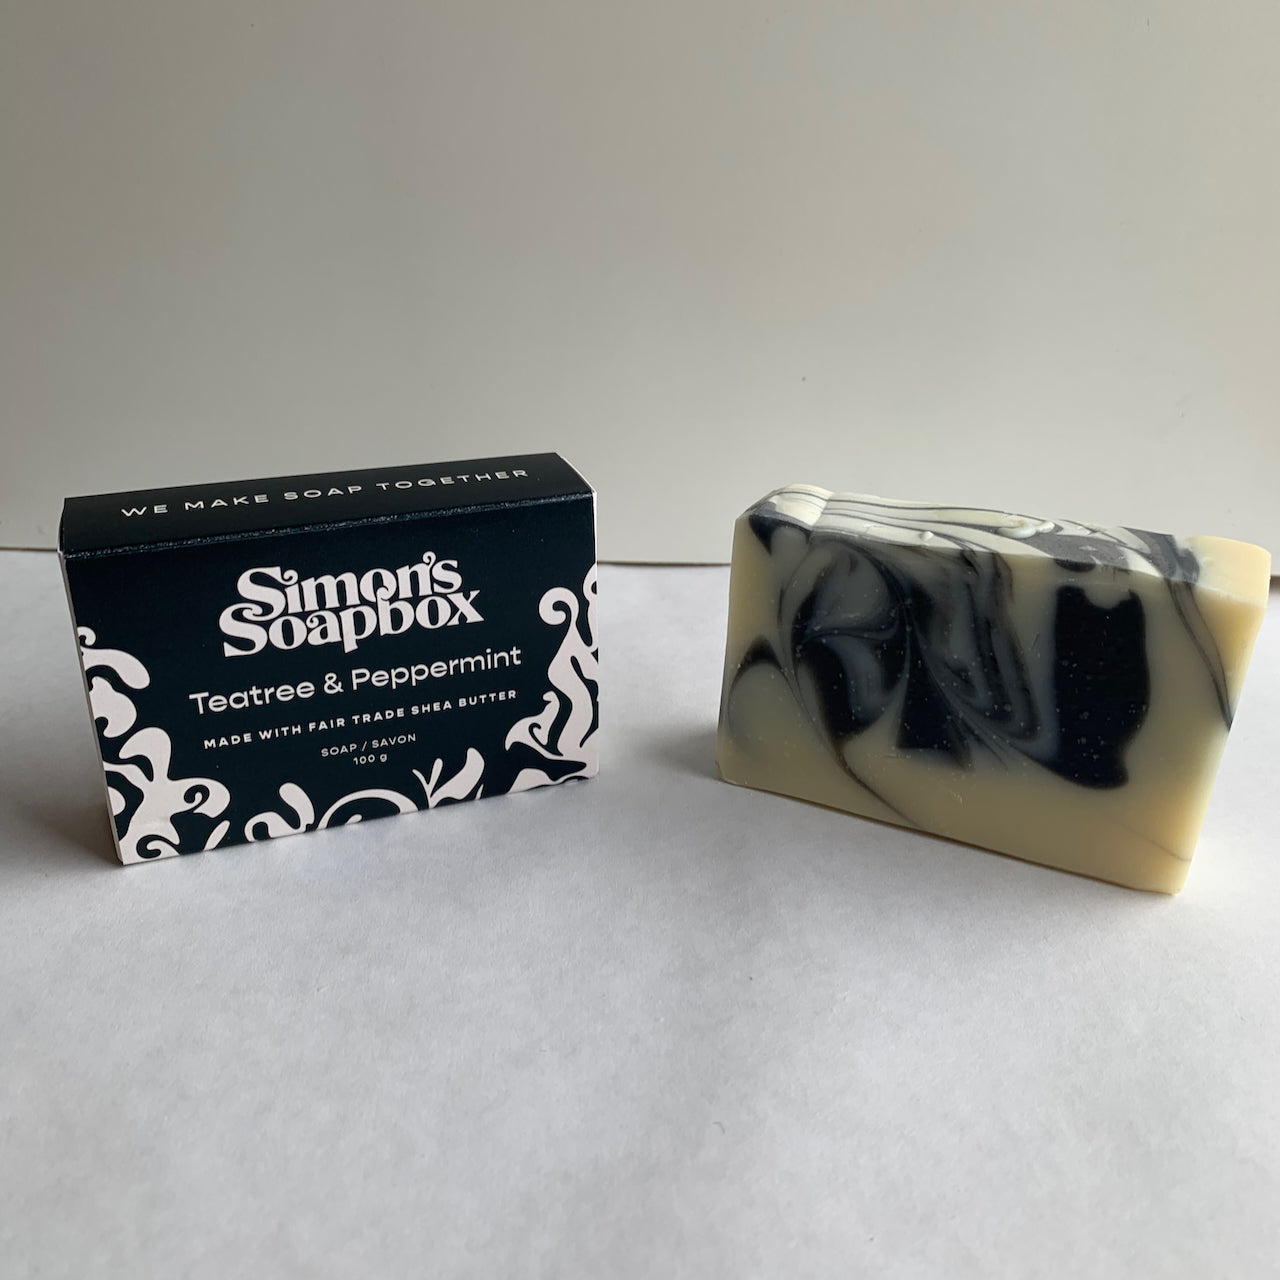 two bars of soap, one in a package and one cream coloured with a black and grey swirl